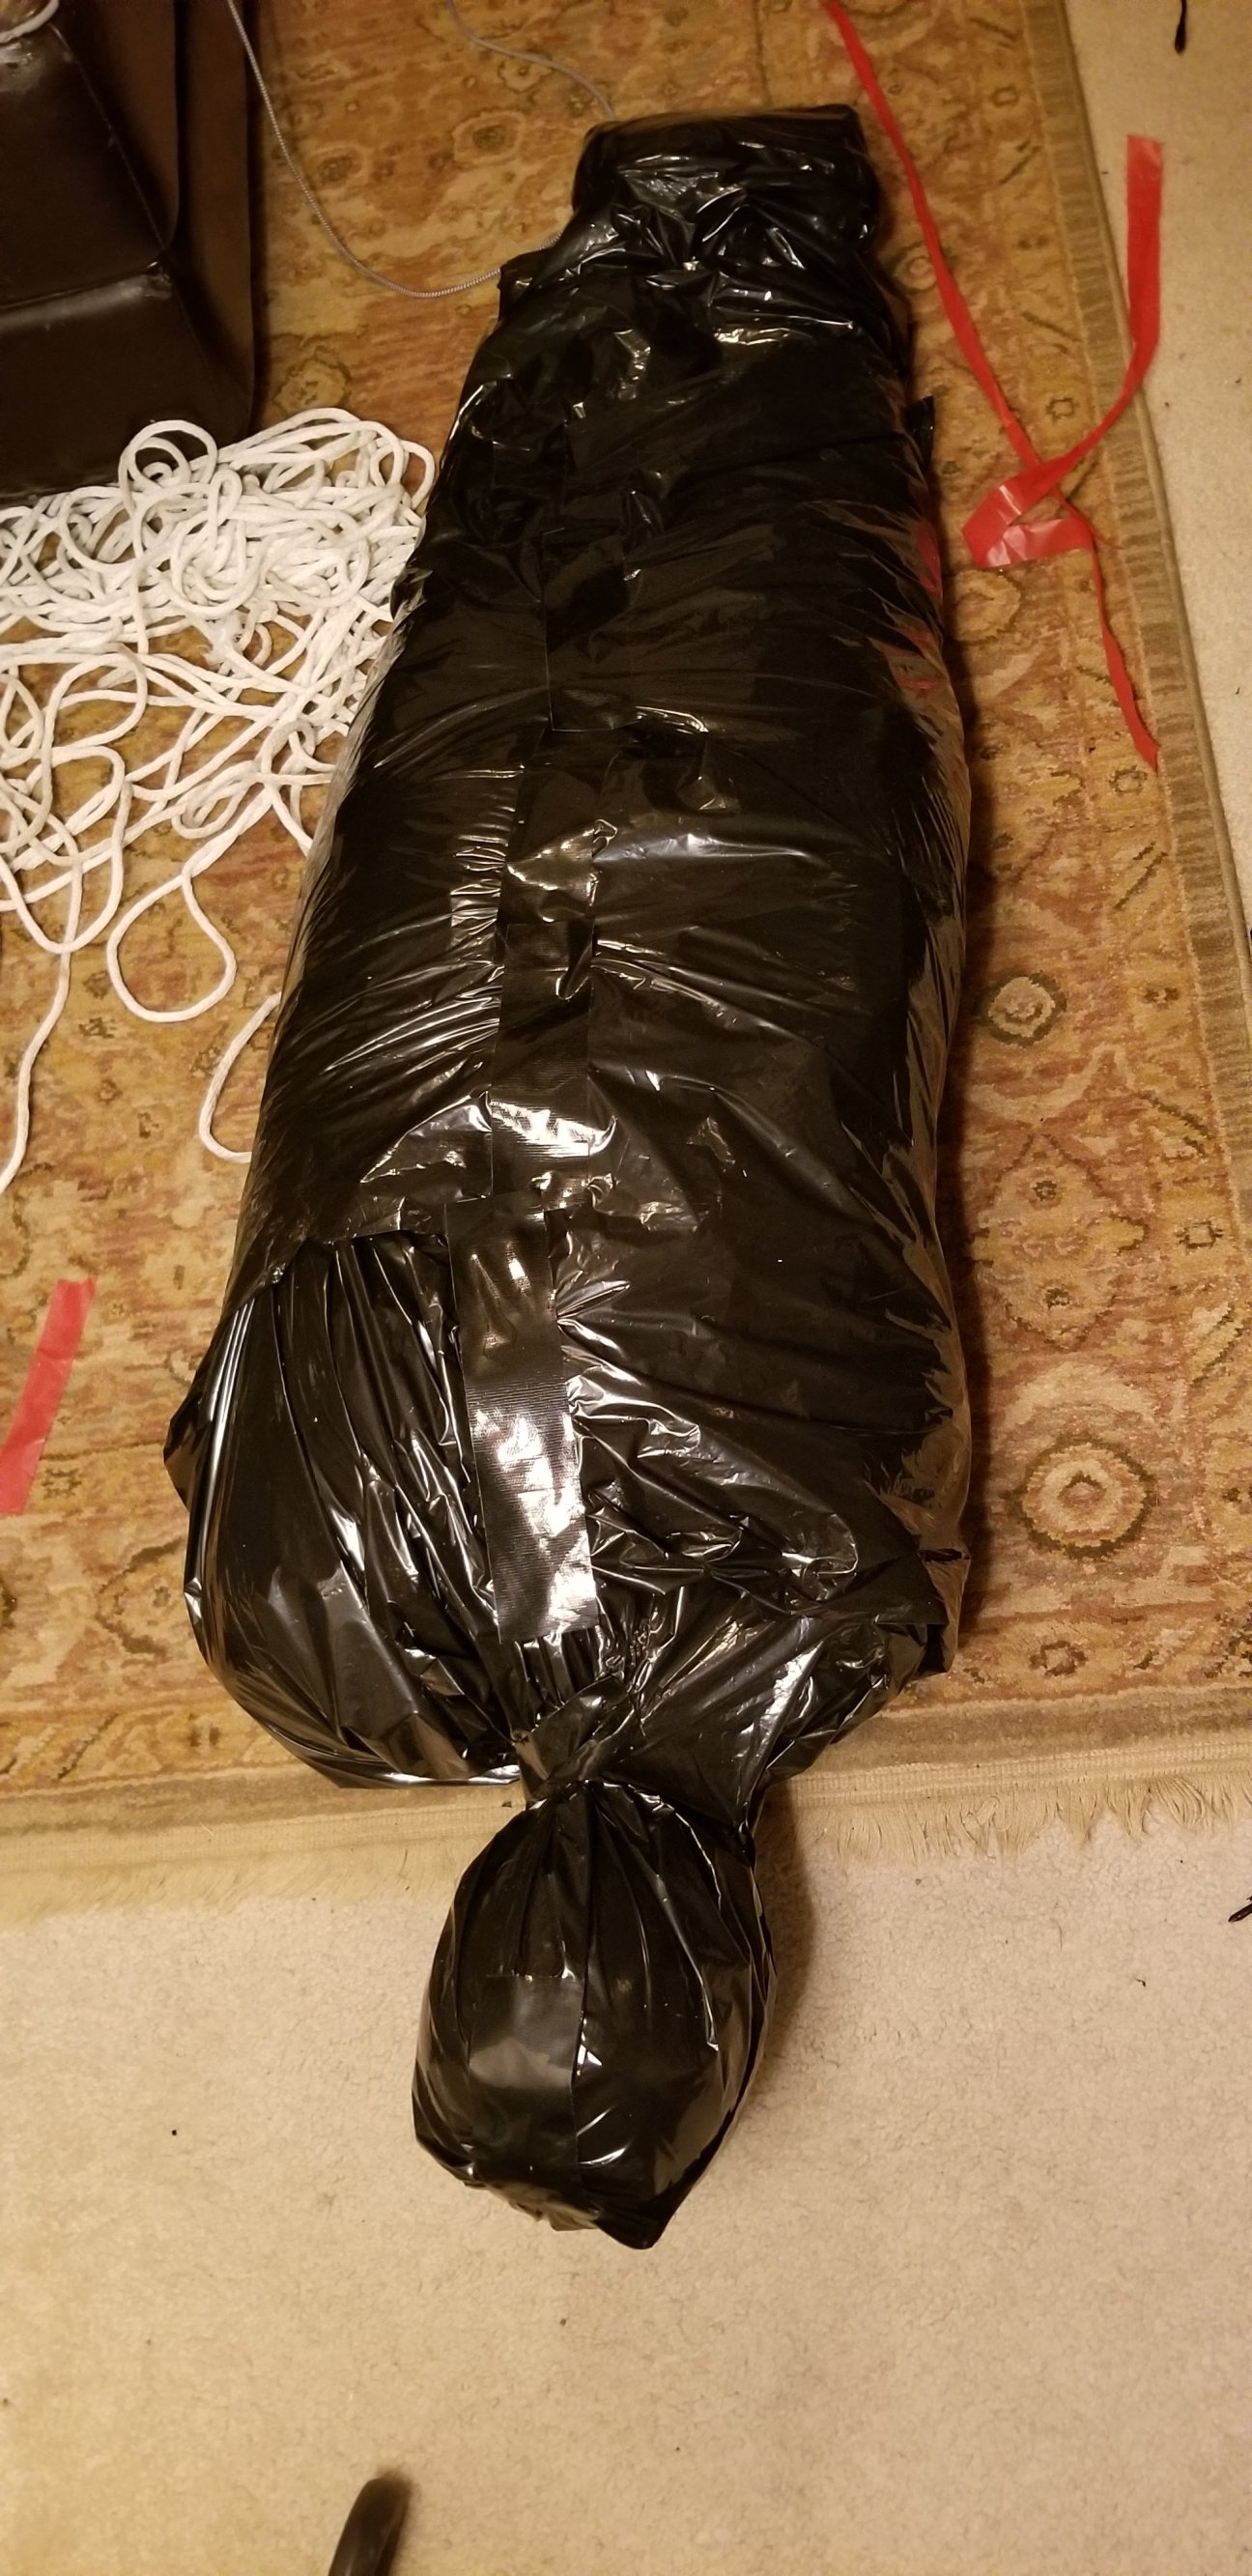 How To Make A Bagged Dead Body For Halloween – Crazy Green Thumbs